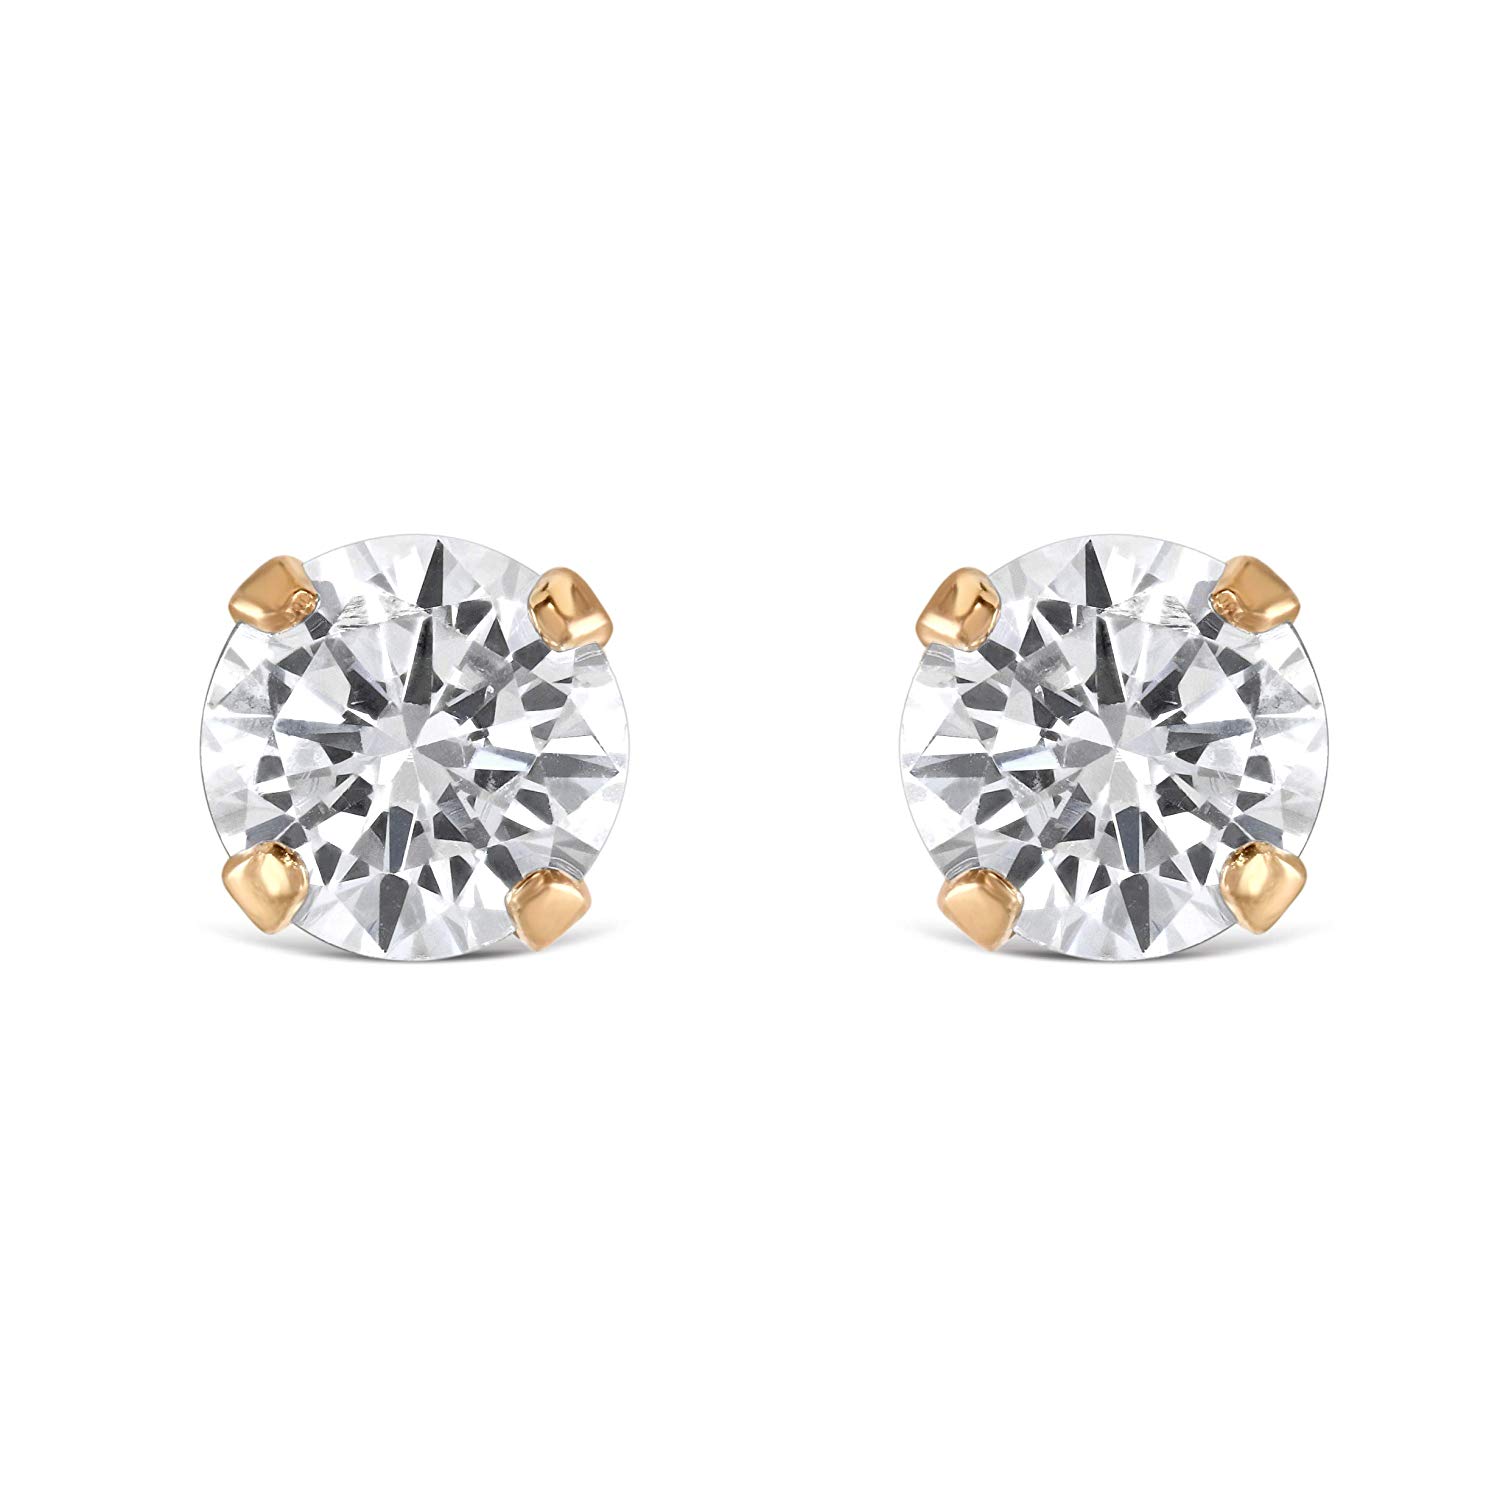 CZ 925 Rose Gold Plated Sterling Silver Stud Earrings in a 4 Claw ...